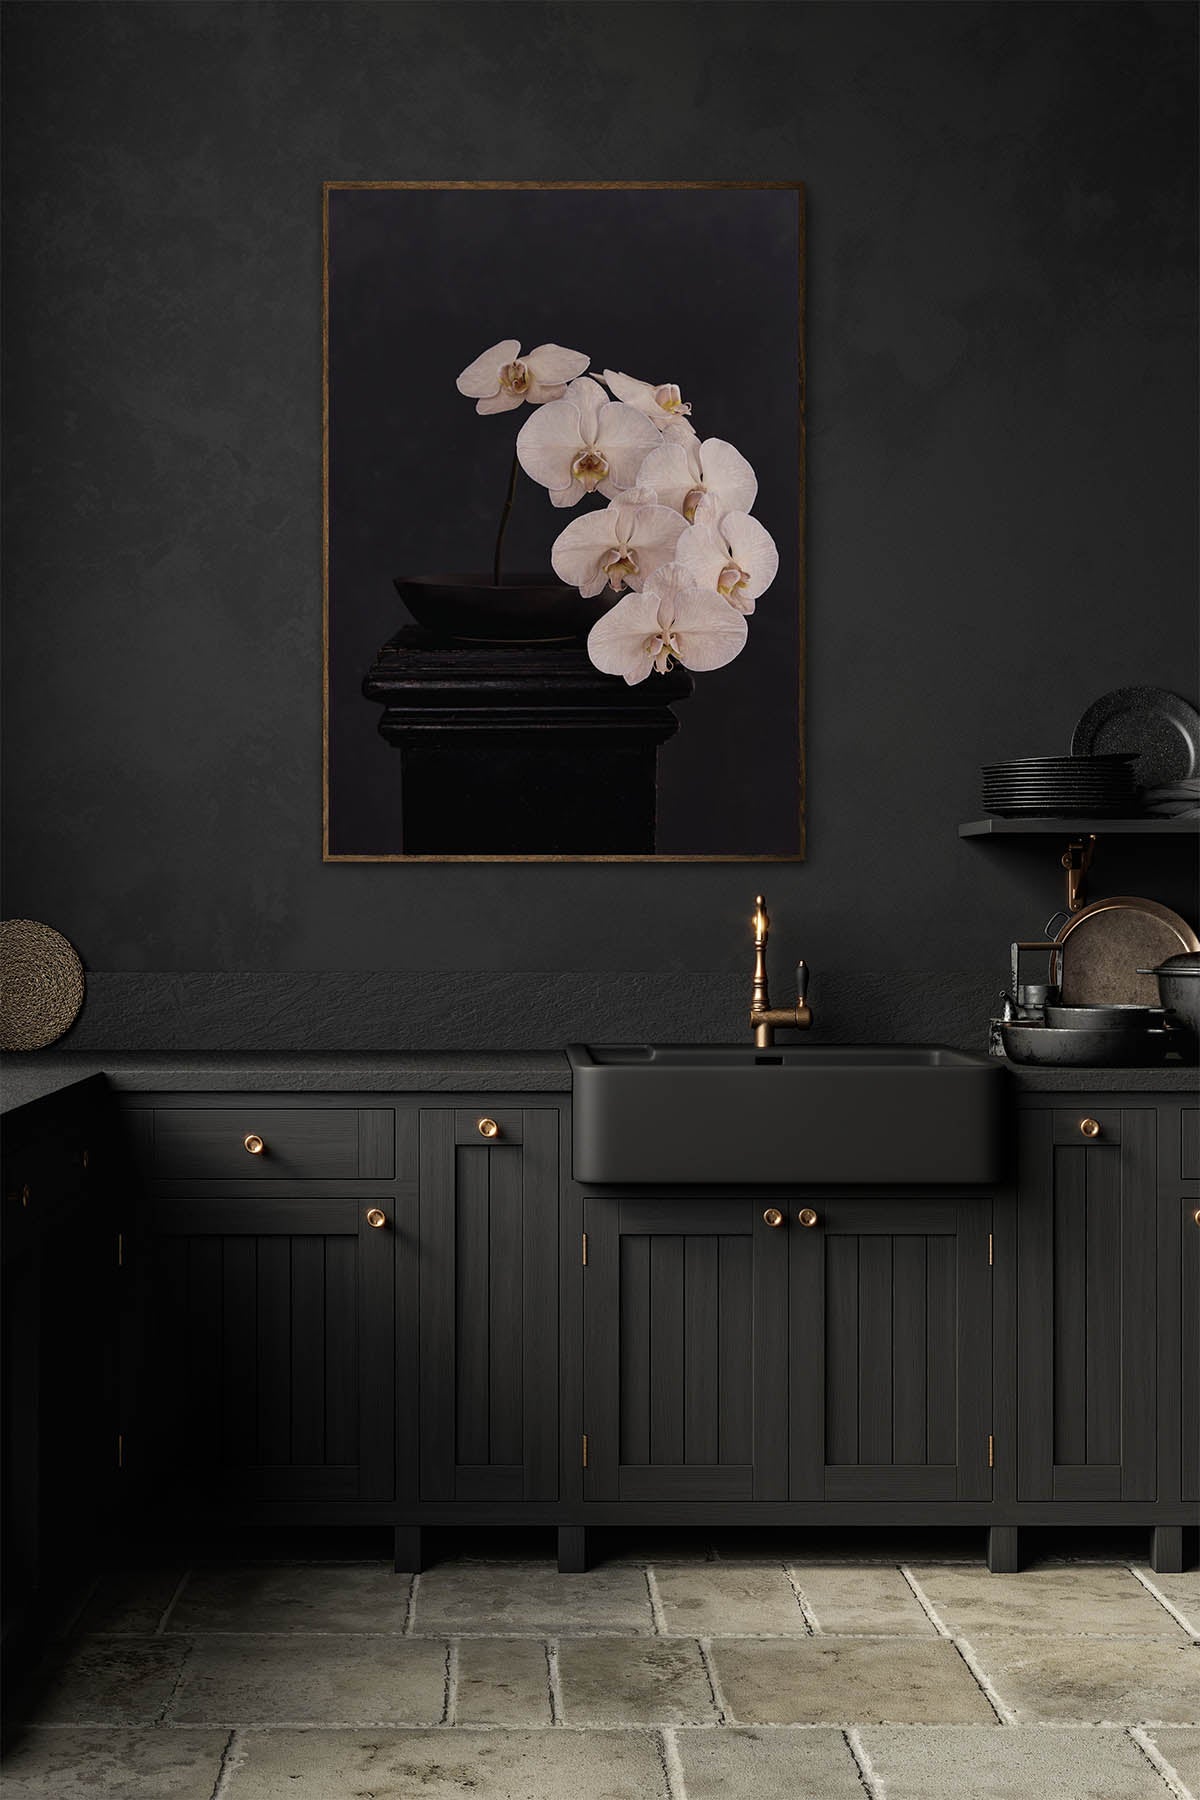 Fine Art Print Of A White Phaleanopsis Stem In A Black Bowl On A Black Mantle In A Black Rustic Kitchen